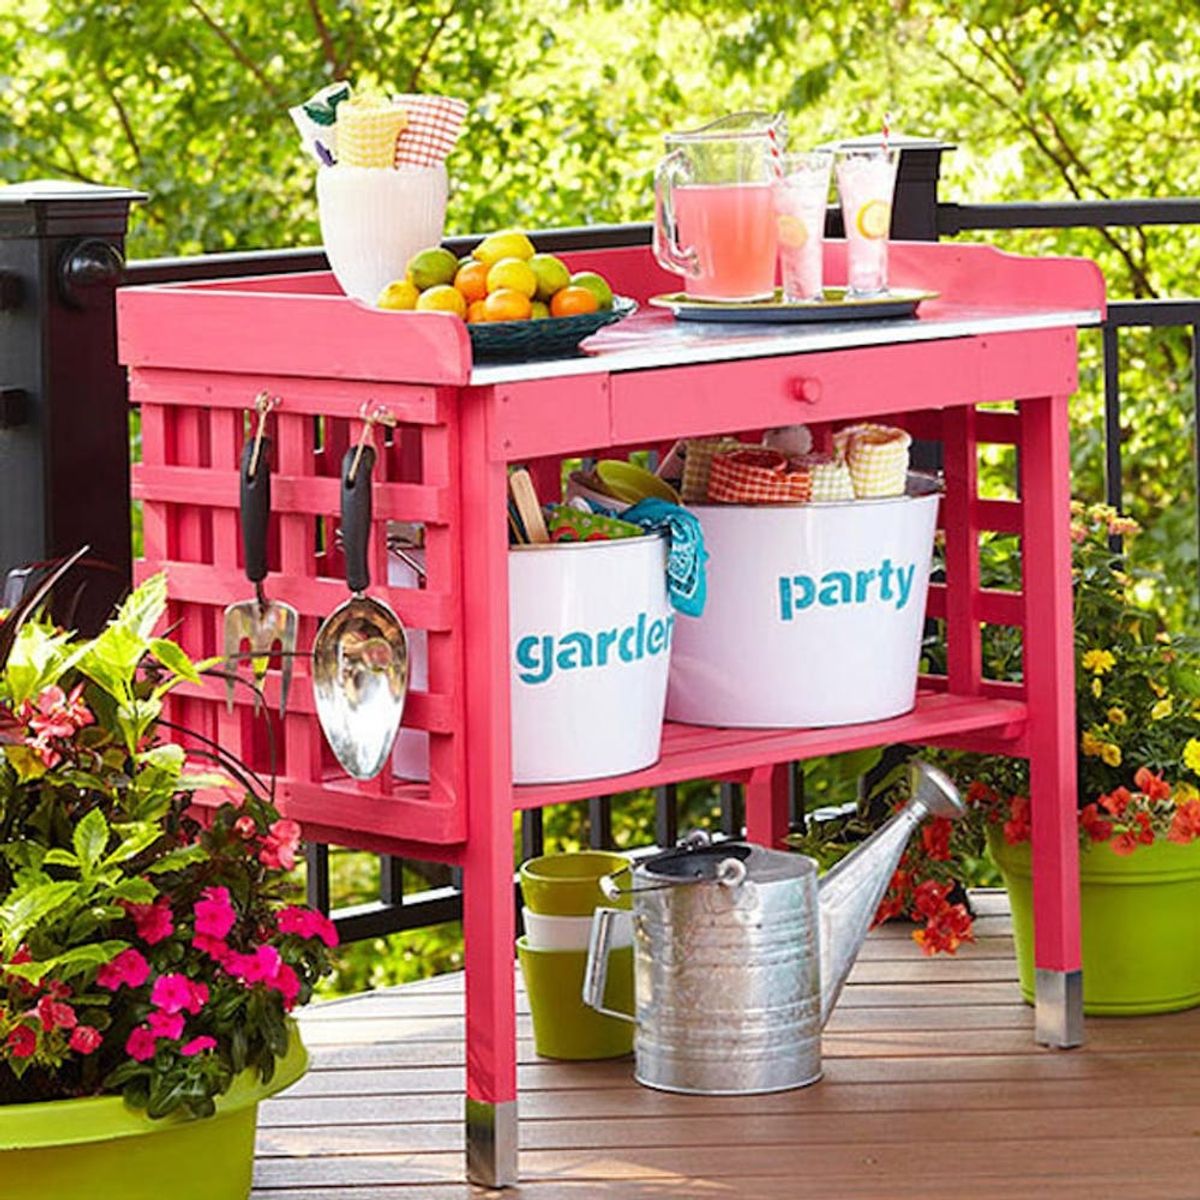 11 Summer Storage Hacks You Need for *All* the Things